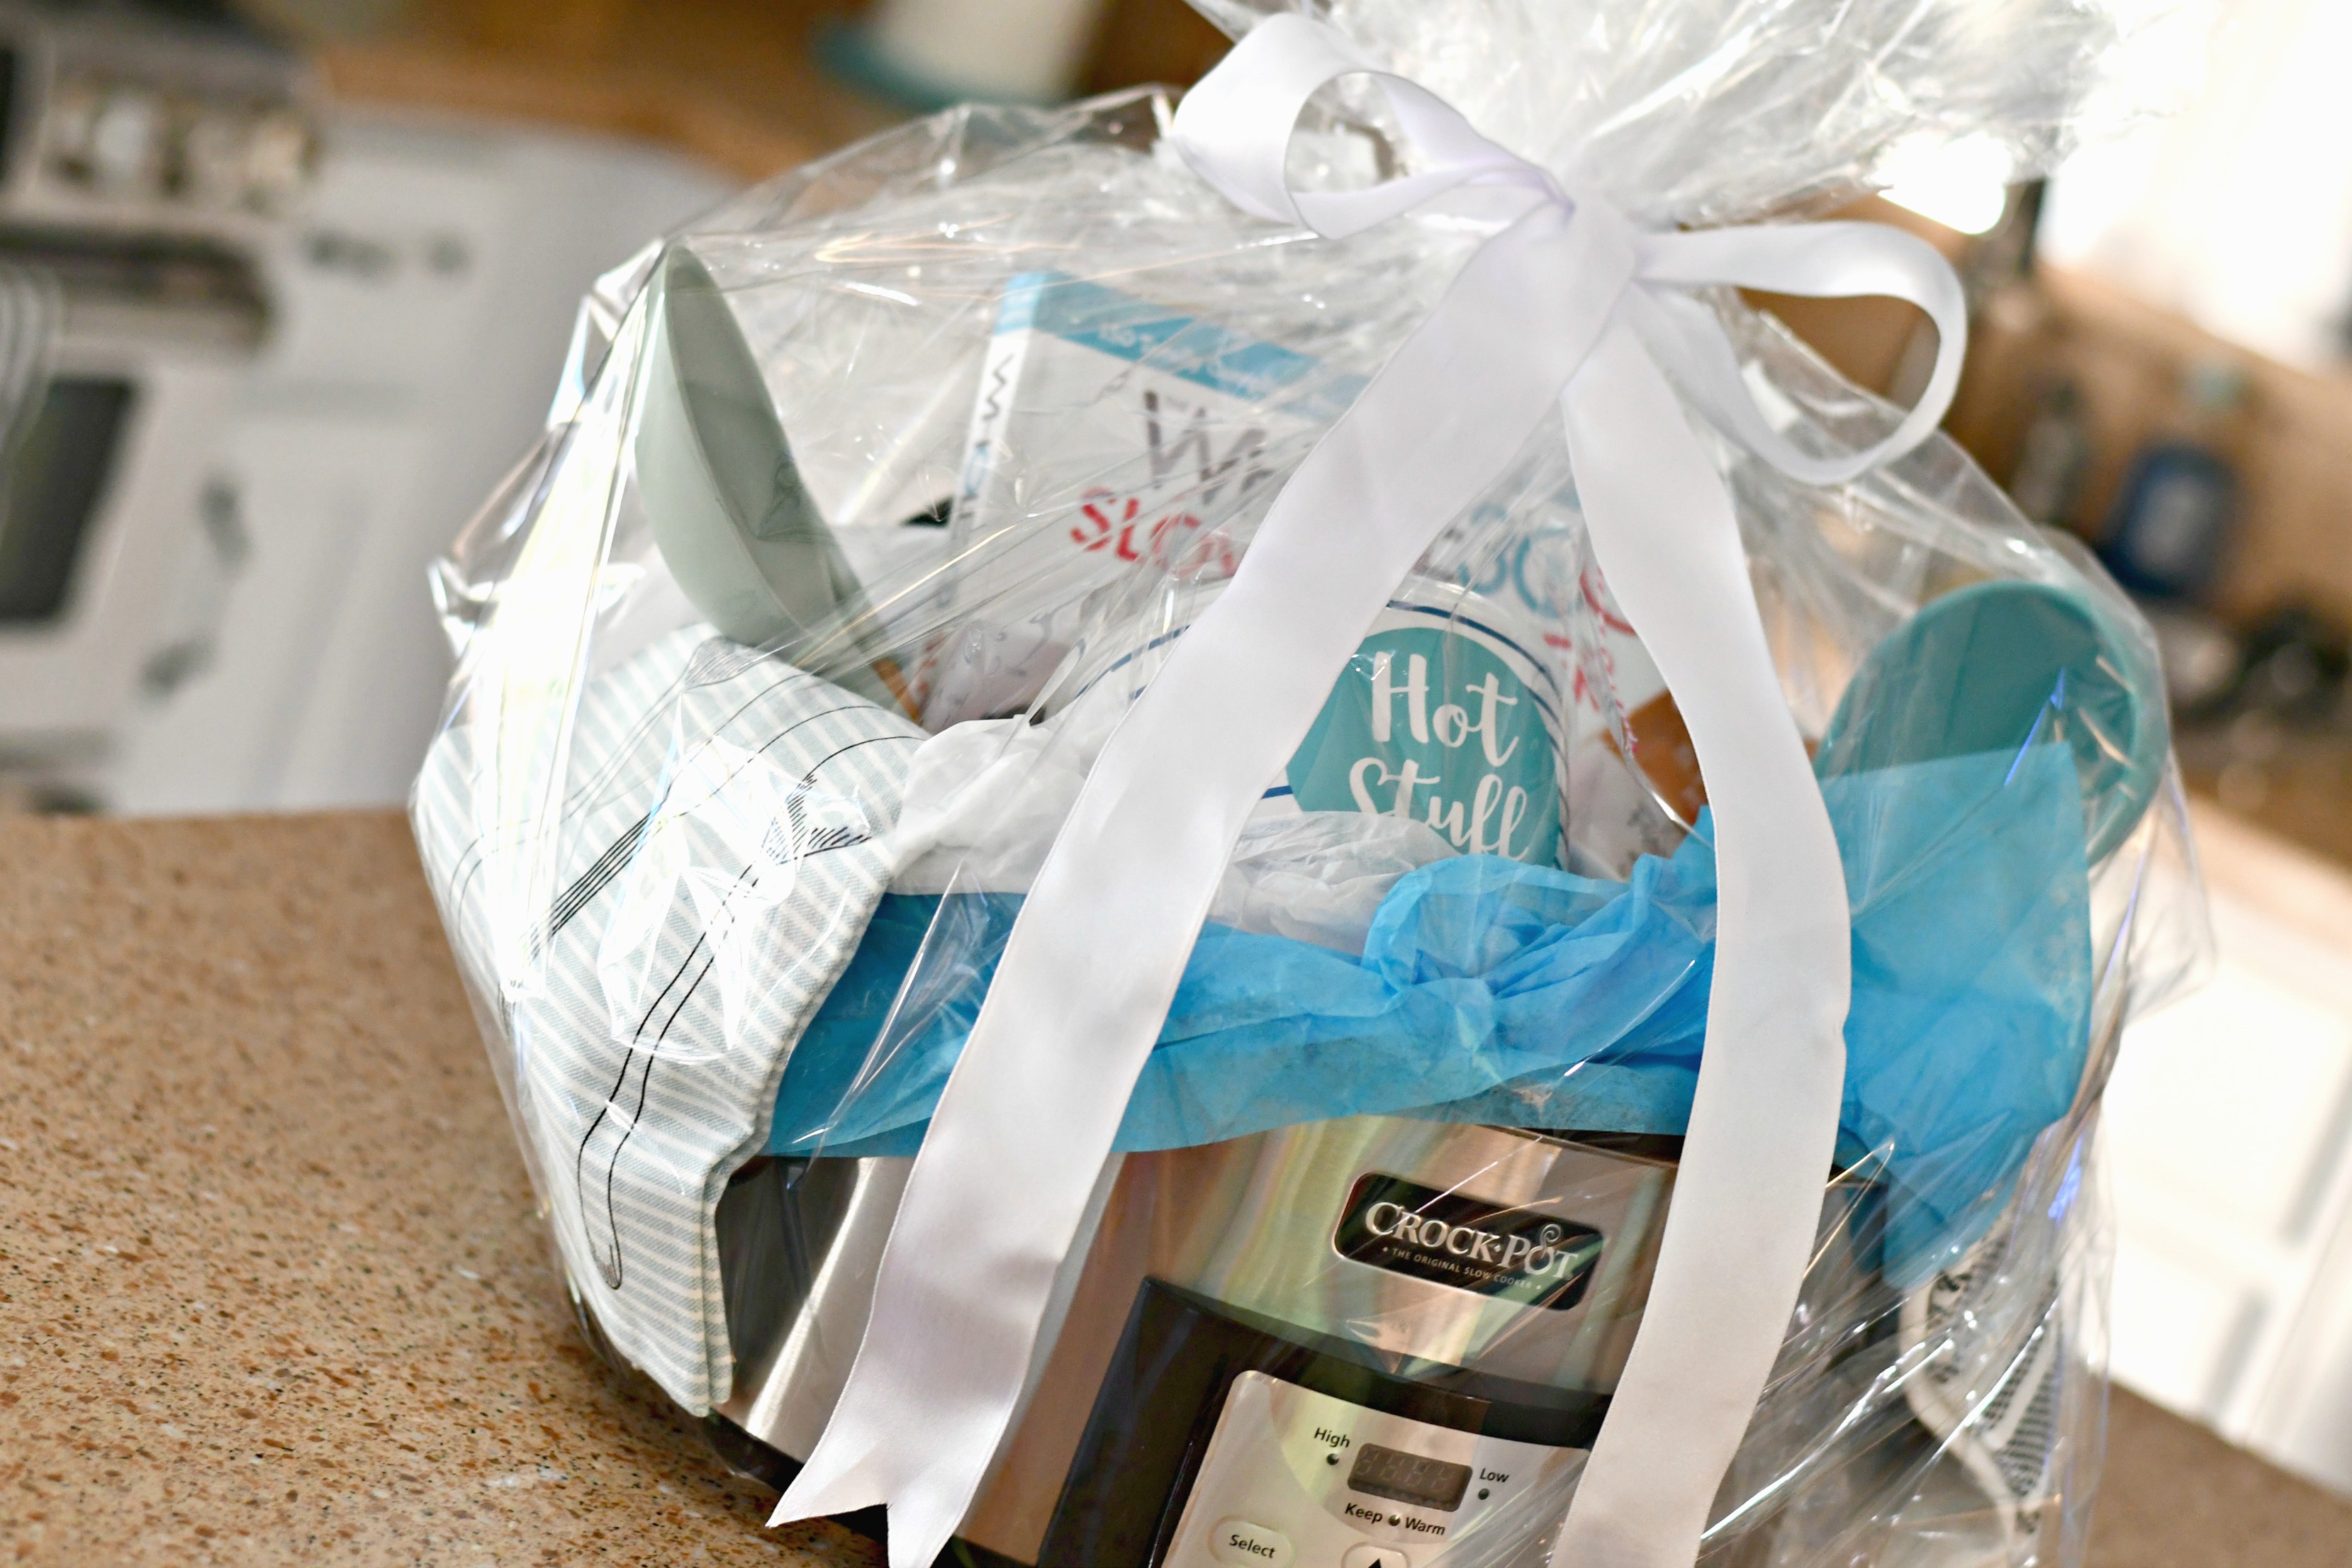 diy gift slow cooker gift basket – All wrapped with clear plastic and a bow